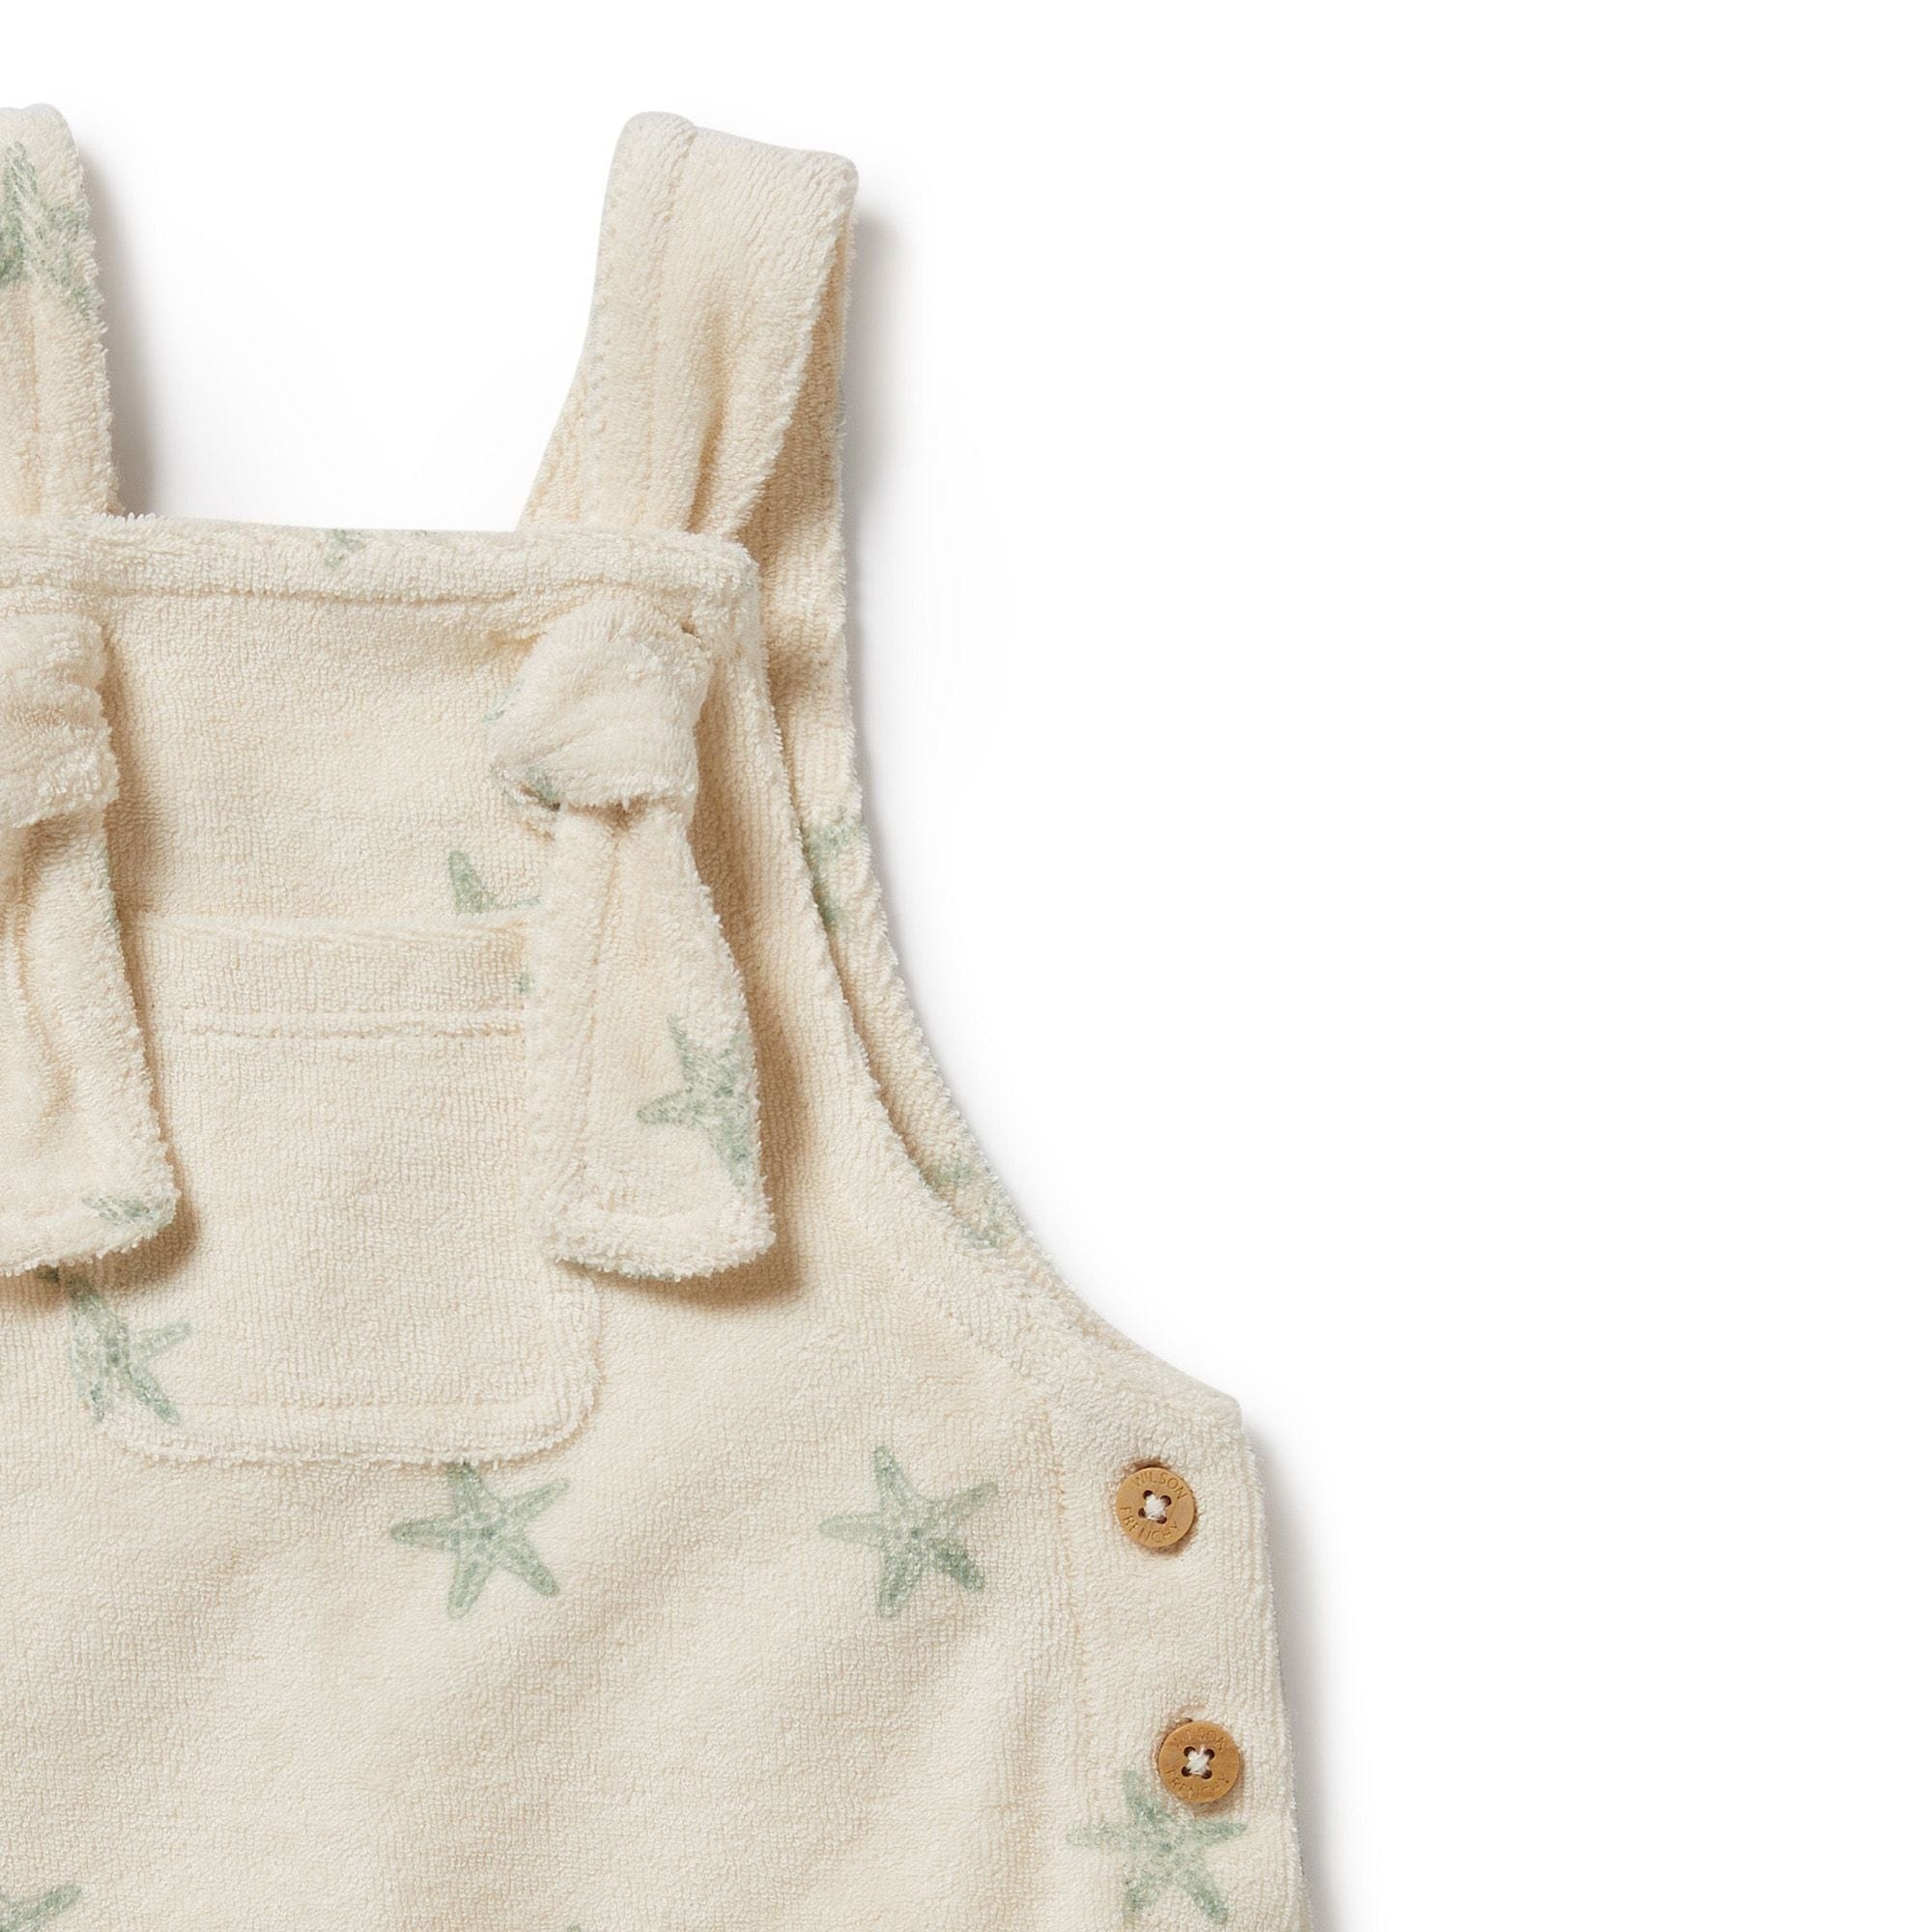 Wilson & Frenchy Boys All In Ones Tiny Starfish Organic Terry Overall